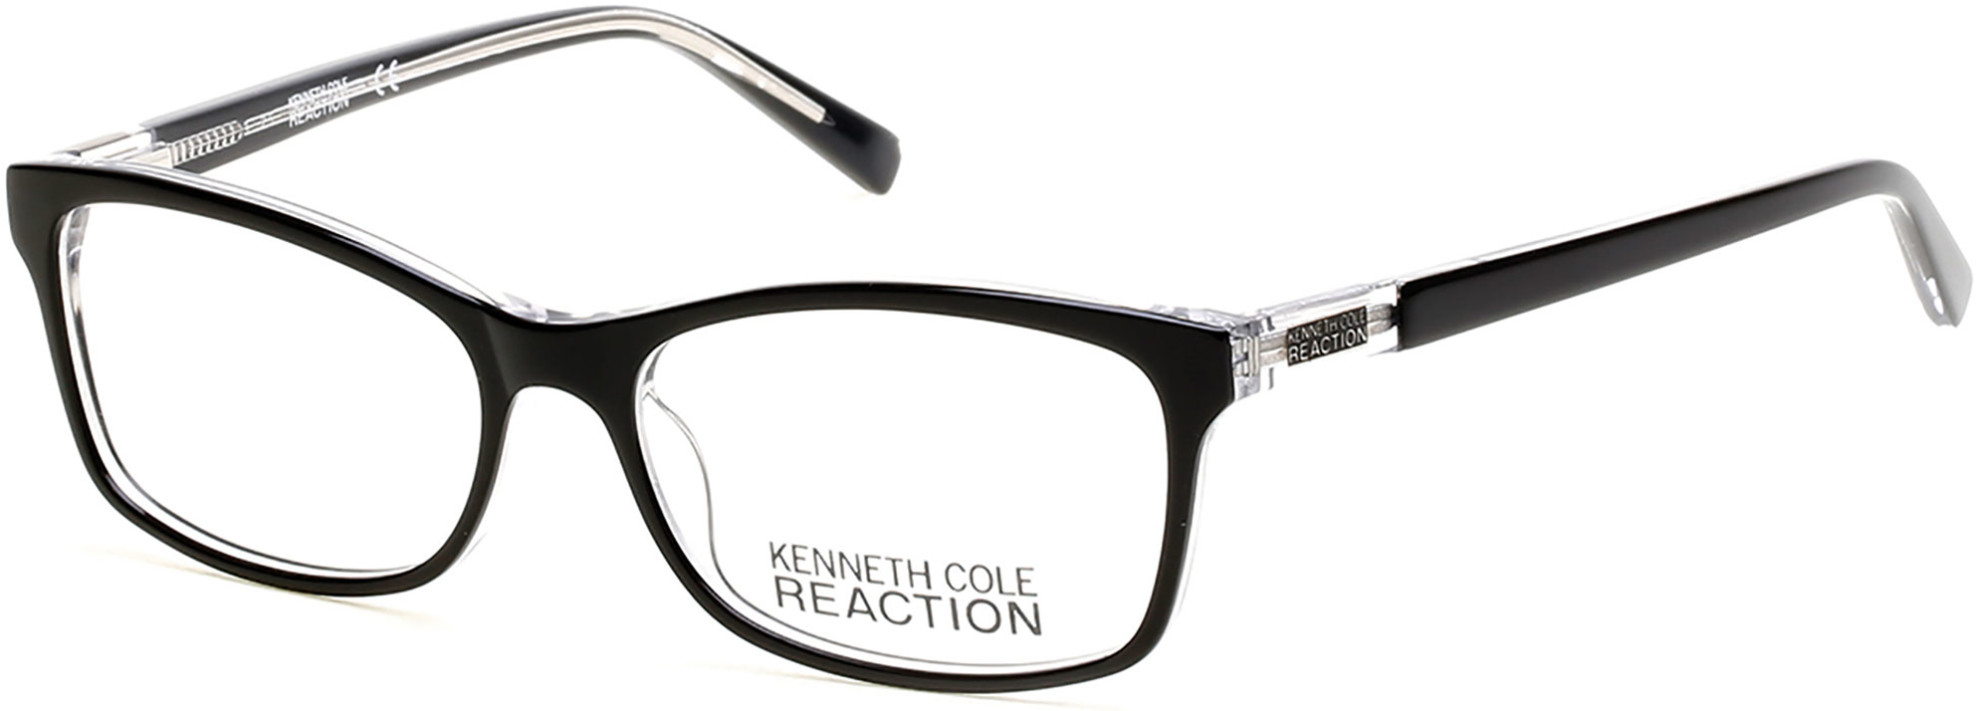 KENNETH COLE NY 0781